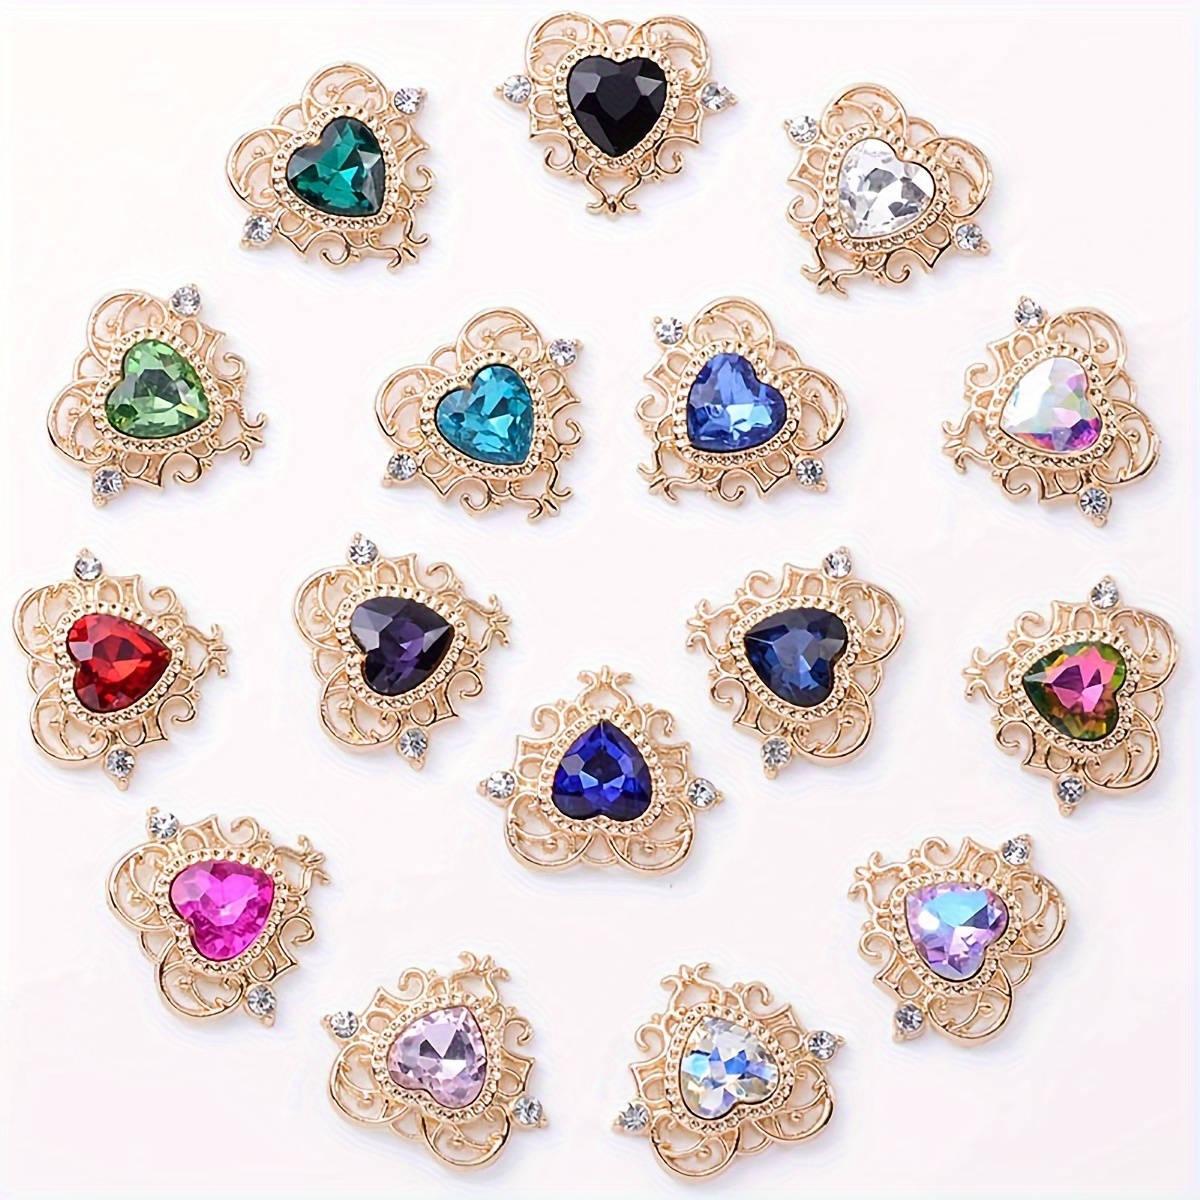 

10pcs Mixed Color Retro Hollow Alloy Heart Shape Pendant Inlaid Rhinestone Baroque Style Pendant 22*26mm Alloy Charms For Diy Bracelet Necklace Earrings Bow Hair Accessories